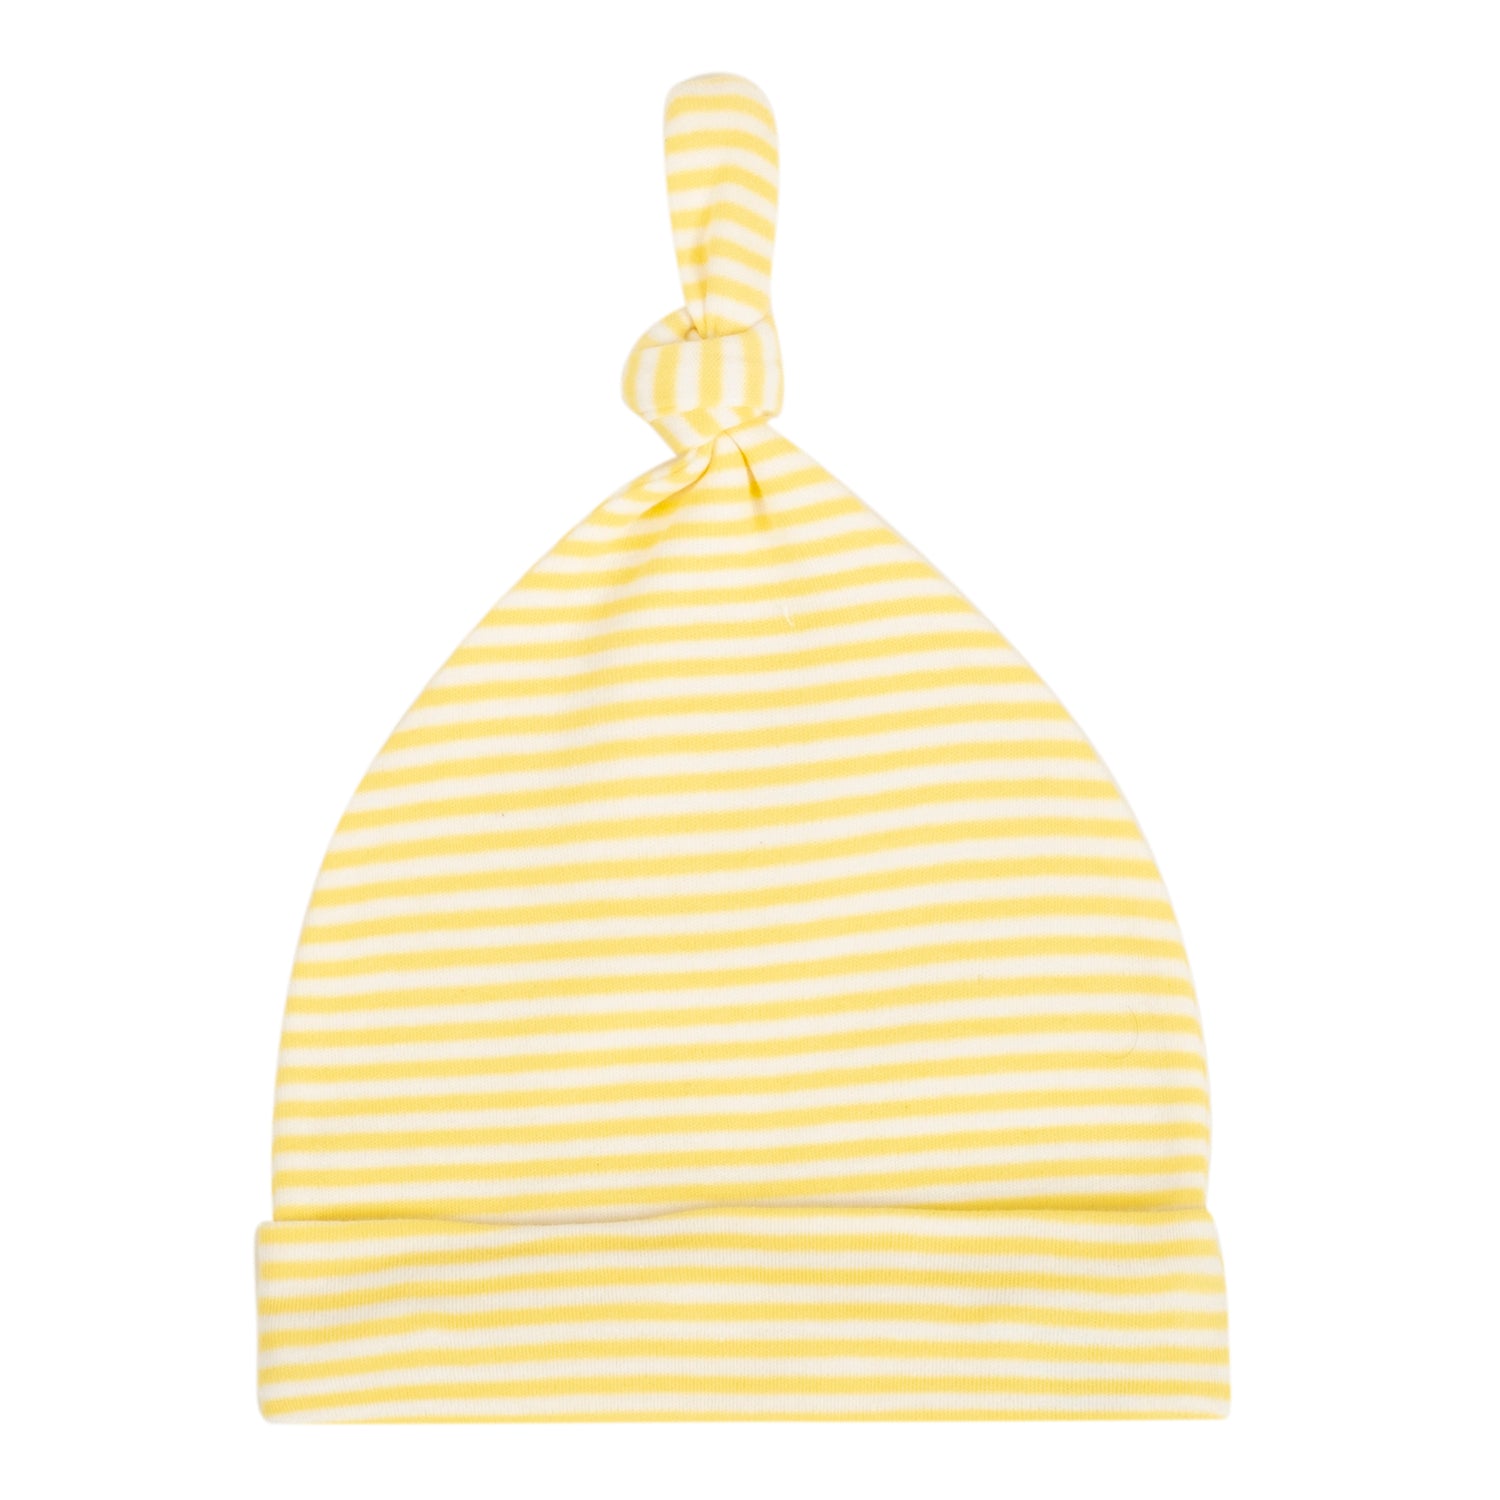 Baby Moo Mommy's Little Sunshine Knotted Infants Ultra Soft 100% Cotton All Season Pack of 3 Caps - Yellow